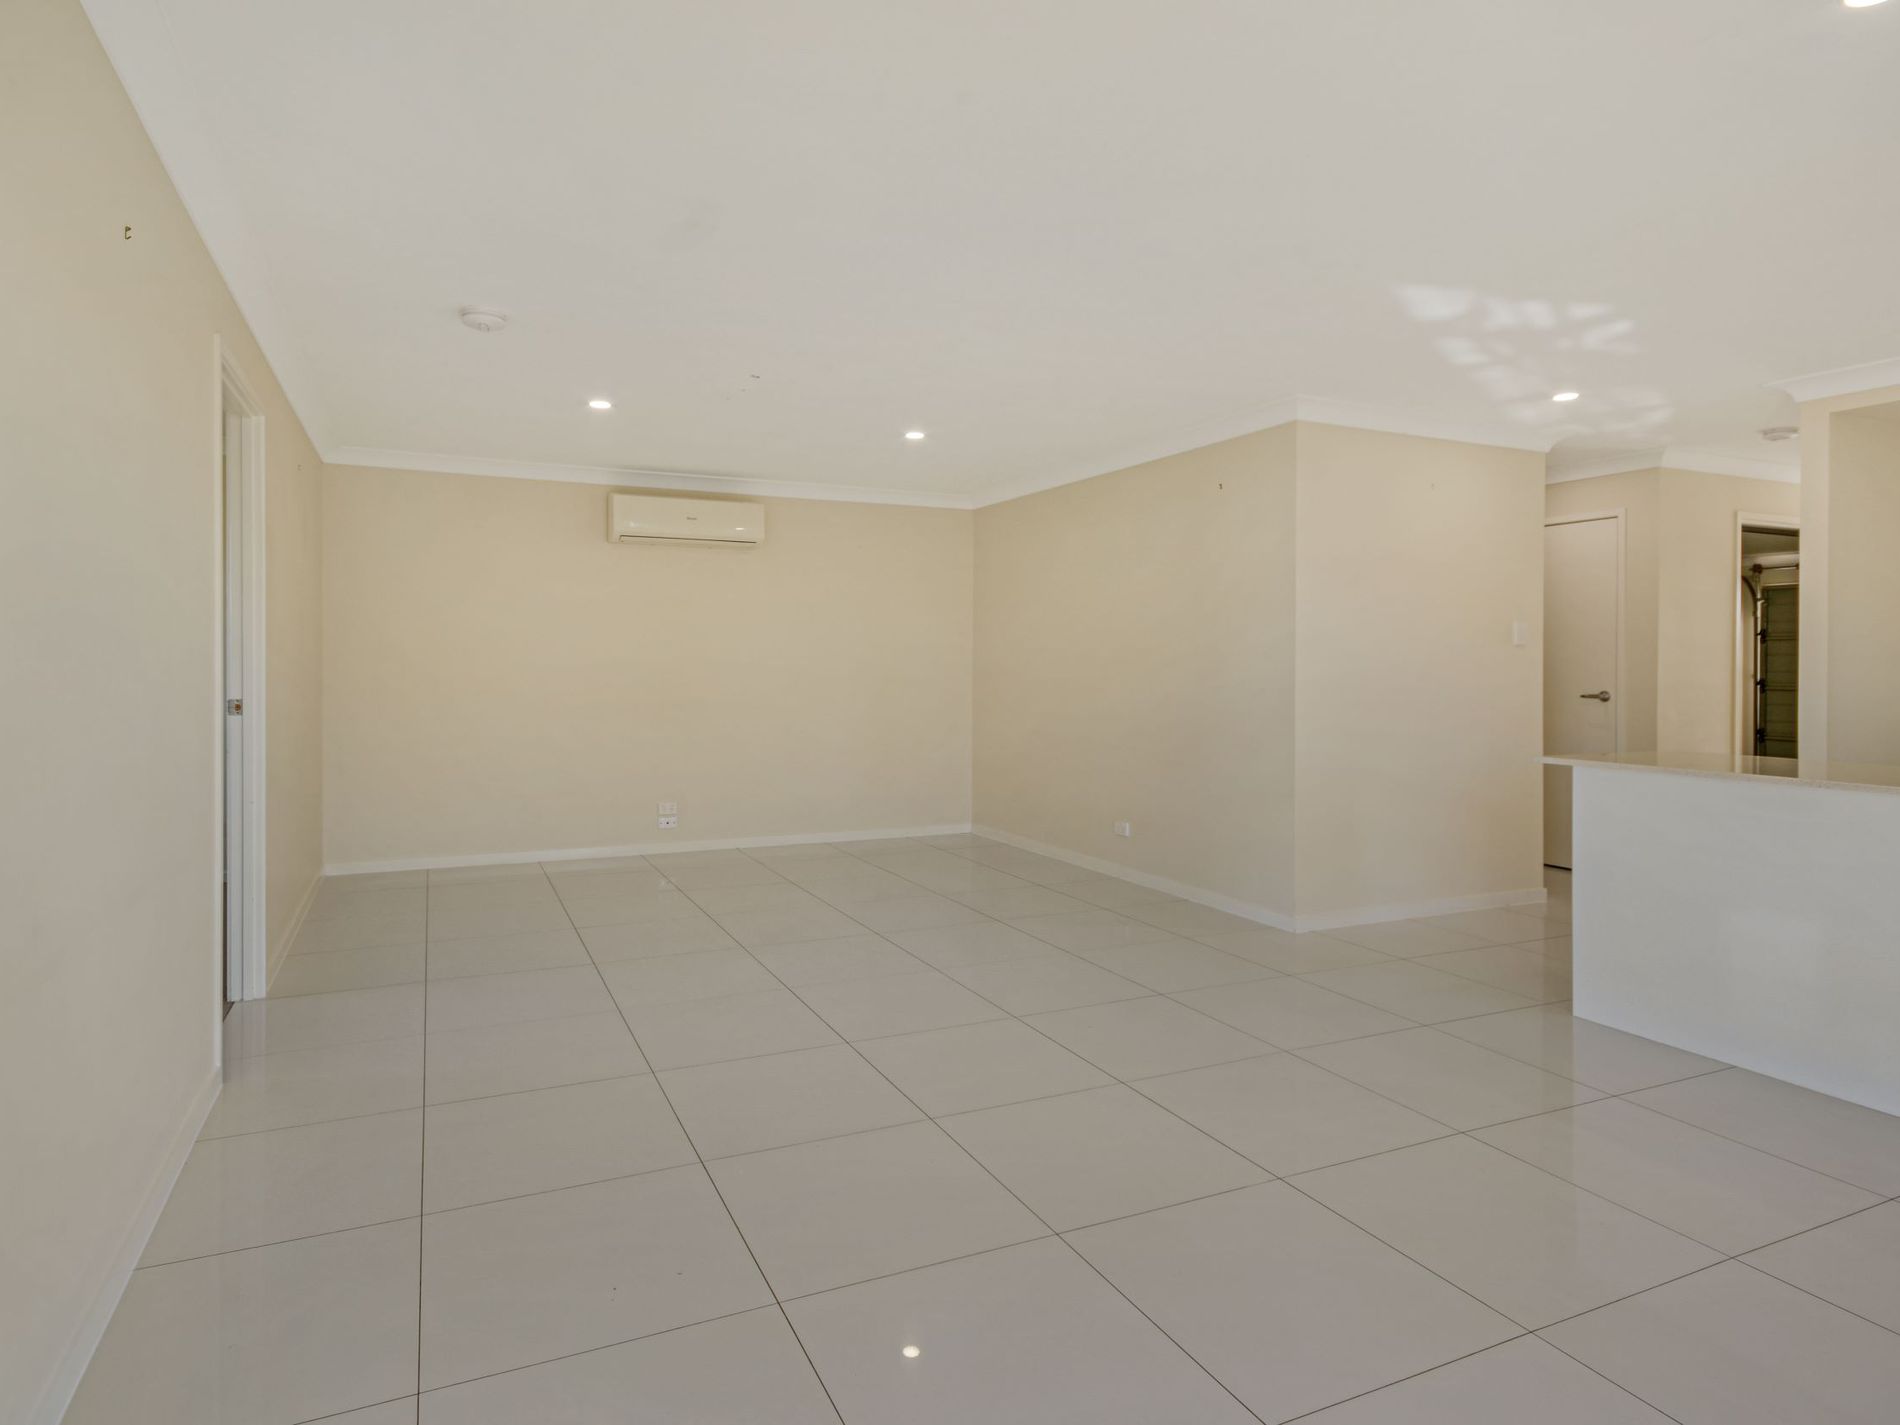 Unit 1 / 11 Weebah Place, Cambooya